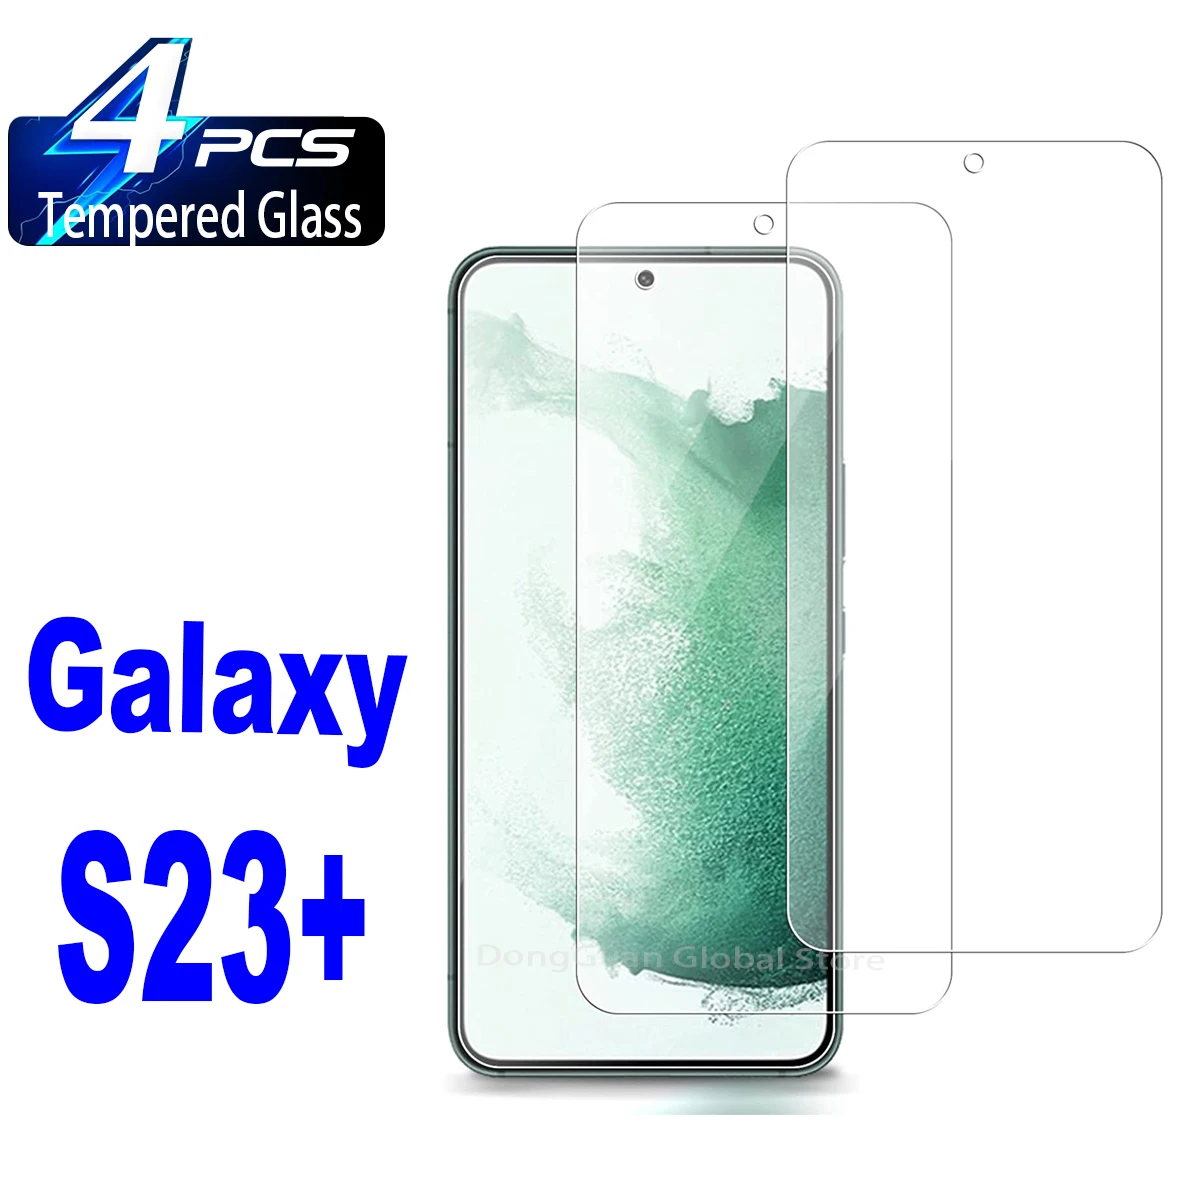 1/4Pcs Tempered Glass For Samsung Galaxy S23+ Screen Protector Glass Film 3pcs tempered glass for samsung galaxy a02s glass screen protector glass tempered for samsung galaxy a01 core protective film